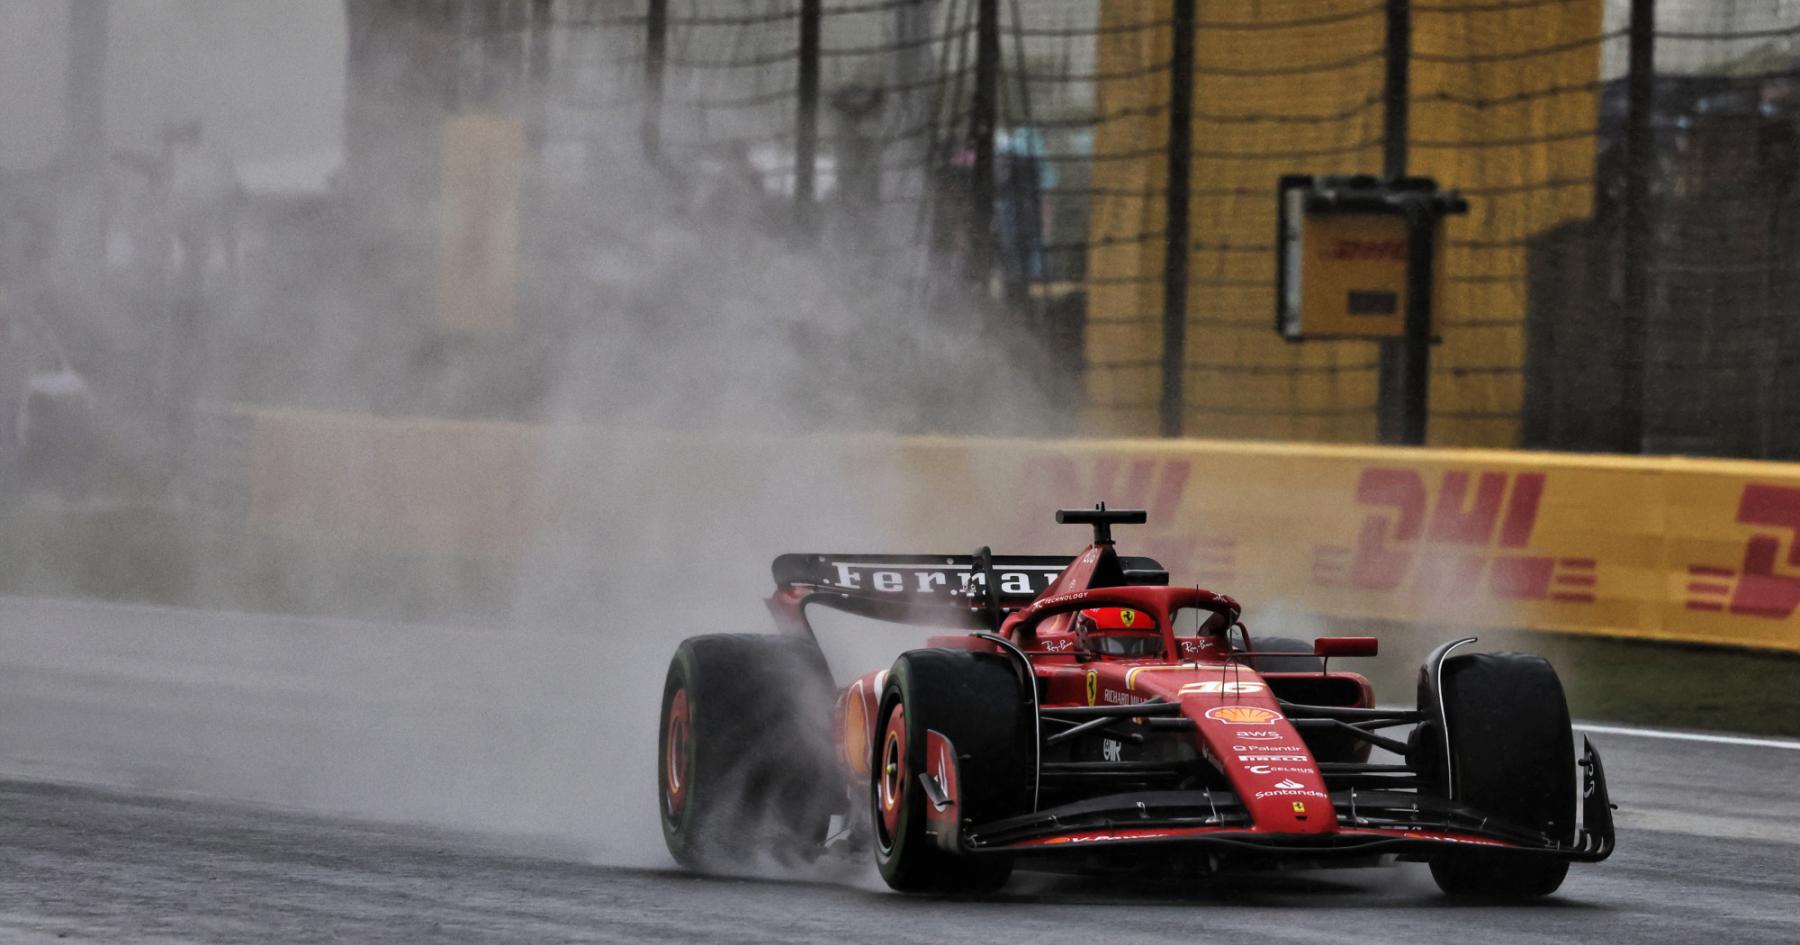 Leclerc Unravels the Enigma Behind the 'Compromised' Sprint Qualifying